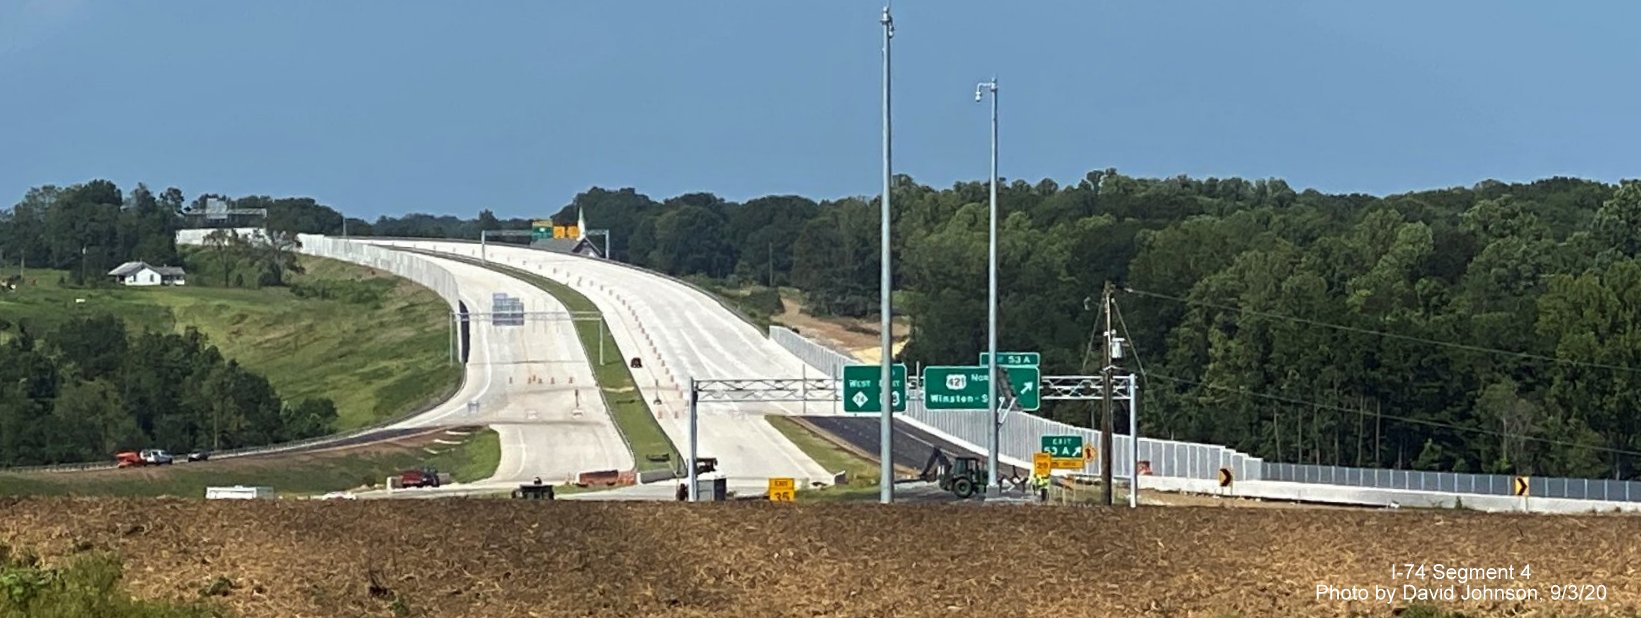 Image of overhead signs at soon to open interchange between NC 74 West/Winston Salem Northern Beltway and US 421 Salem Parkway, by David Johnson, September 2020